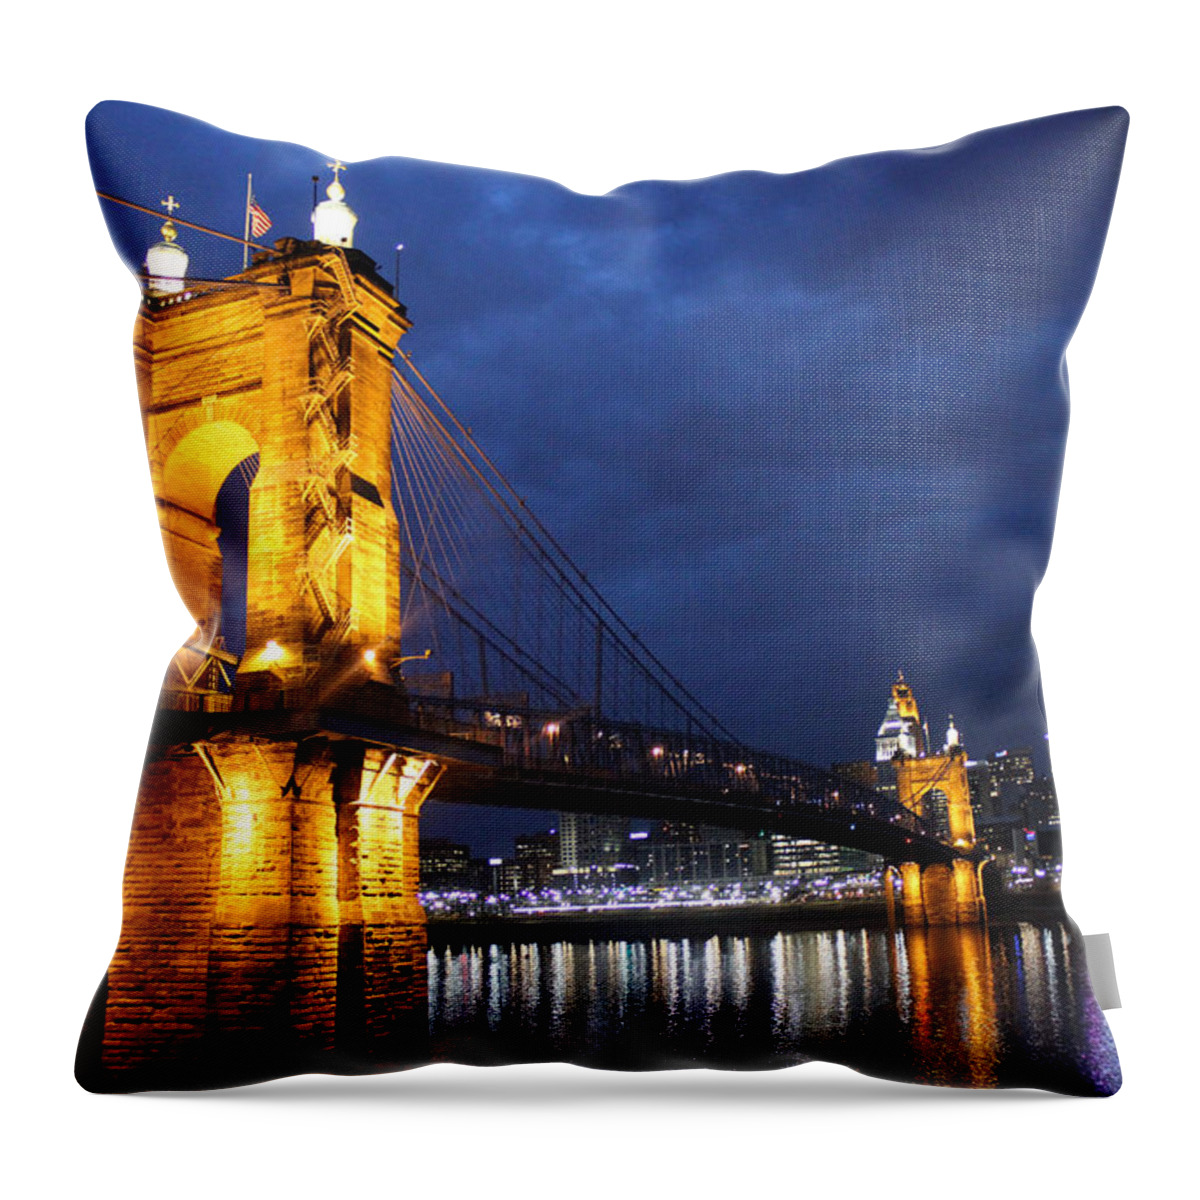 Bridge Throw Pillow featuring the photograph Roebling At Night by Tonya Peters